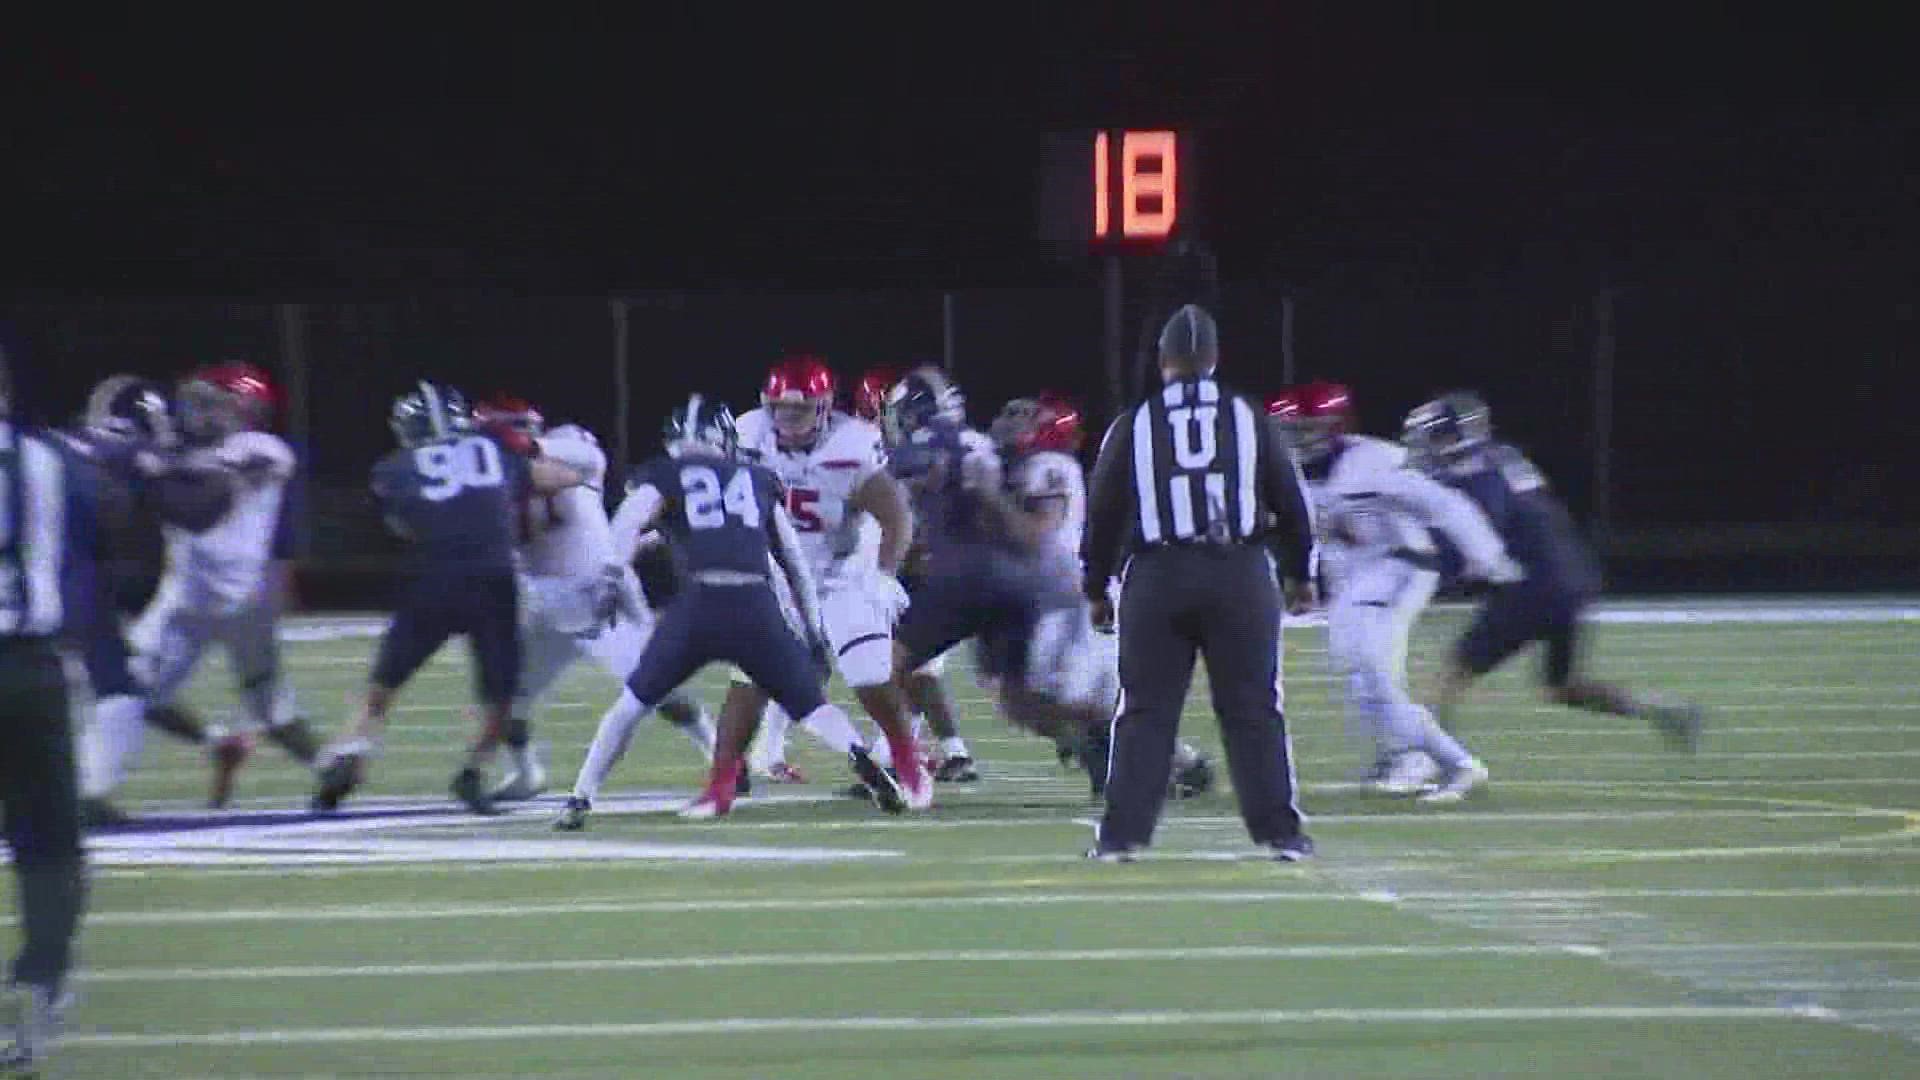 More than 10 high school football games were played Friday night.